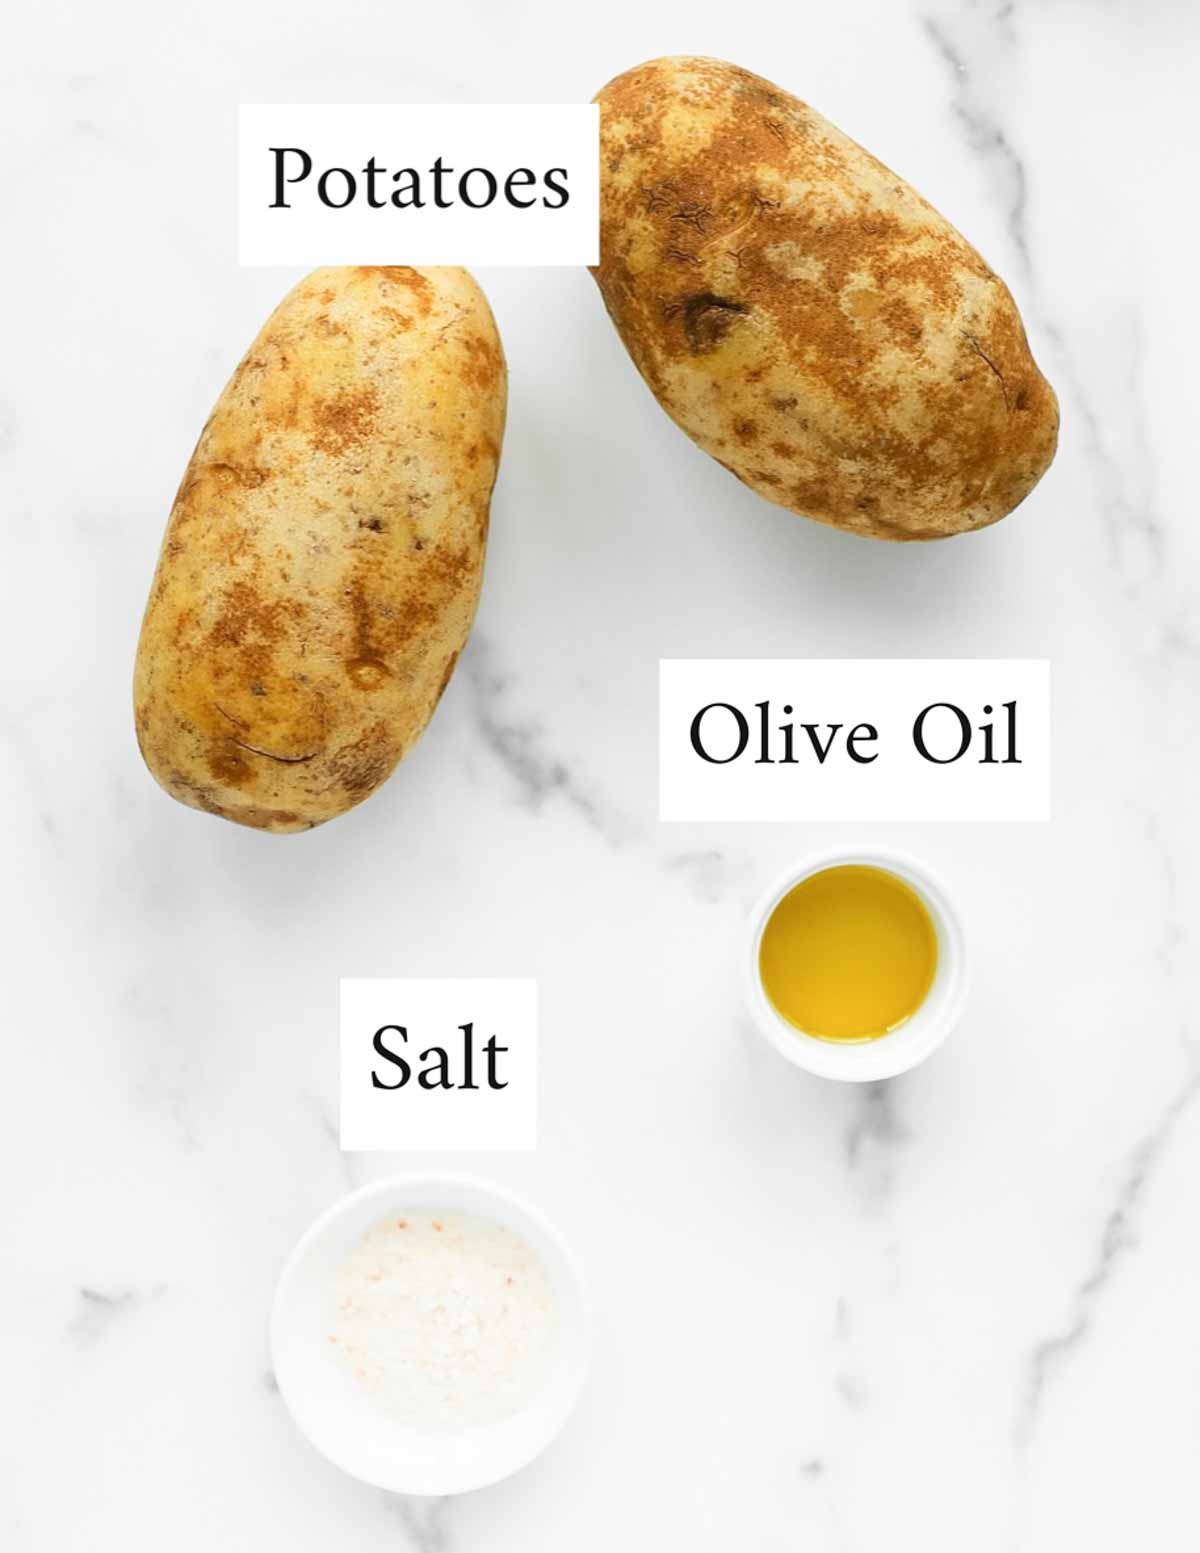 an overhead image of two potatoes, a small white dish containing olive oil, and a small white dish containing salt